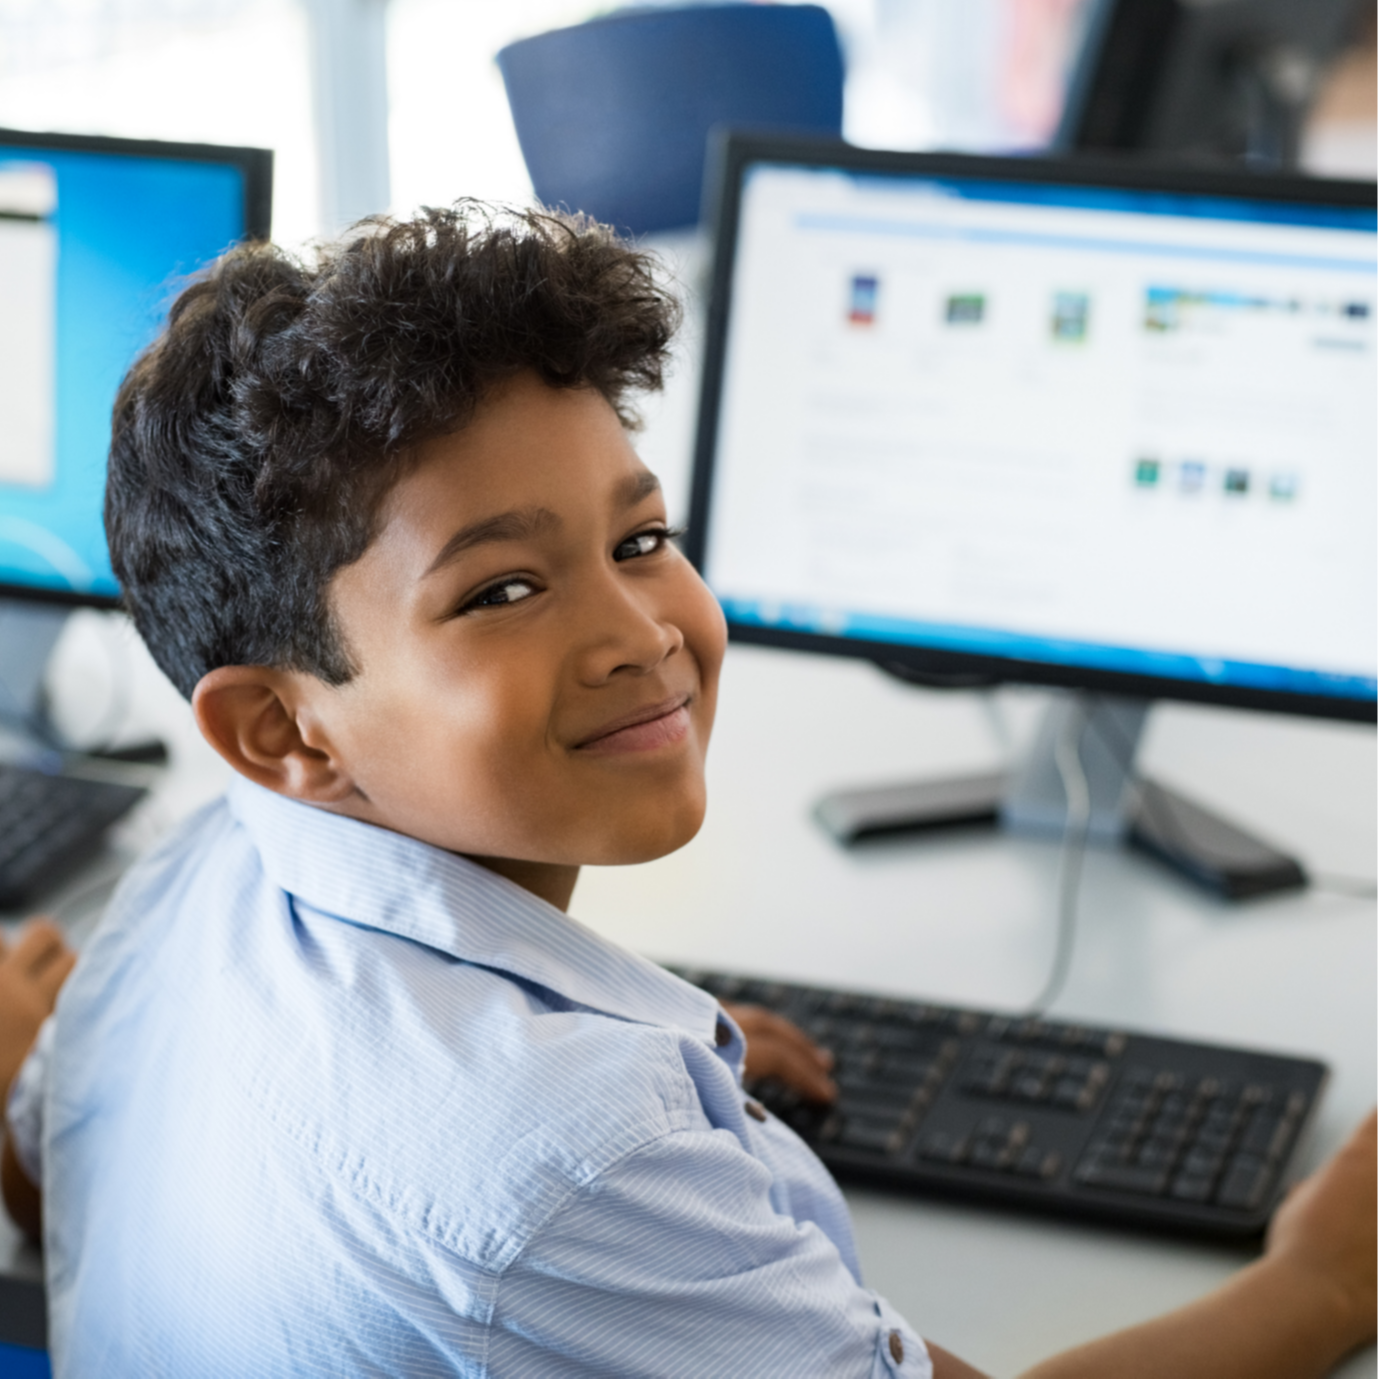 student smiling with computer in the background